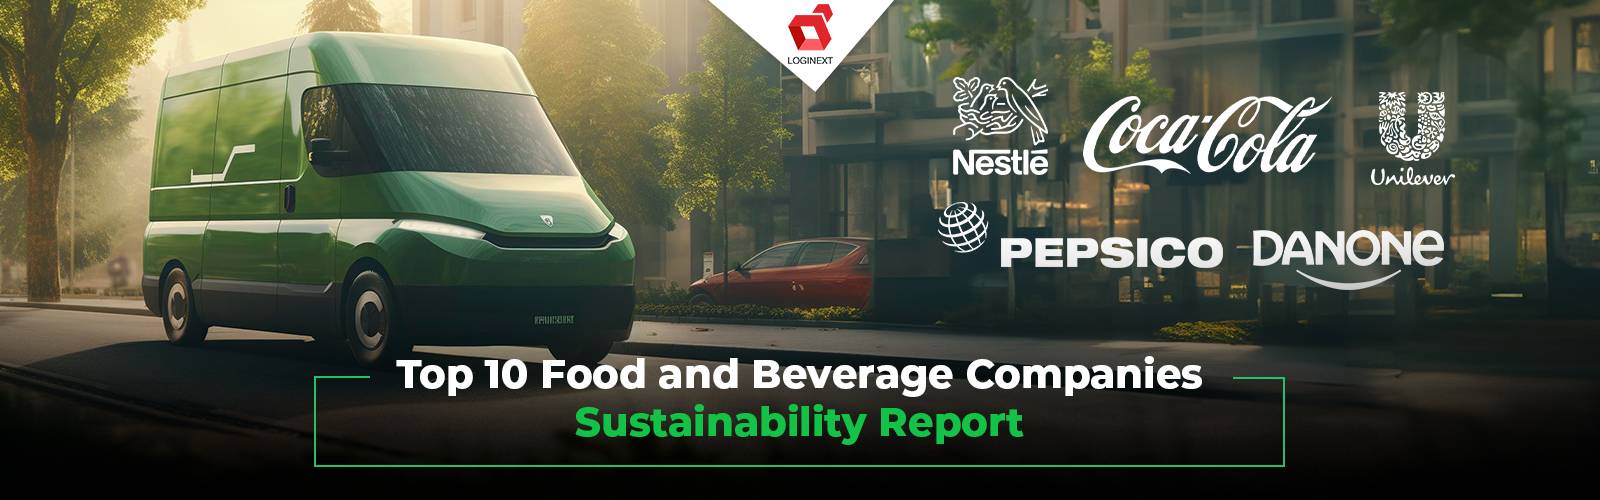 Sustainability Report of top 10 food and beverage companies